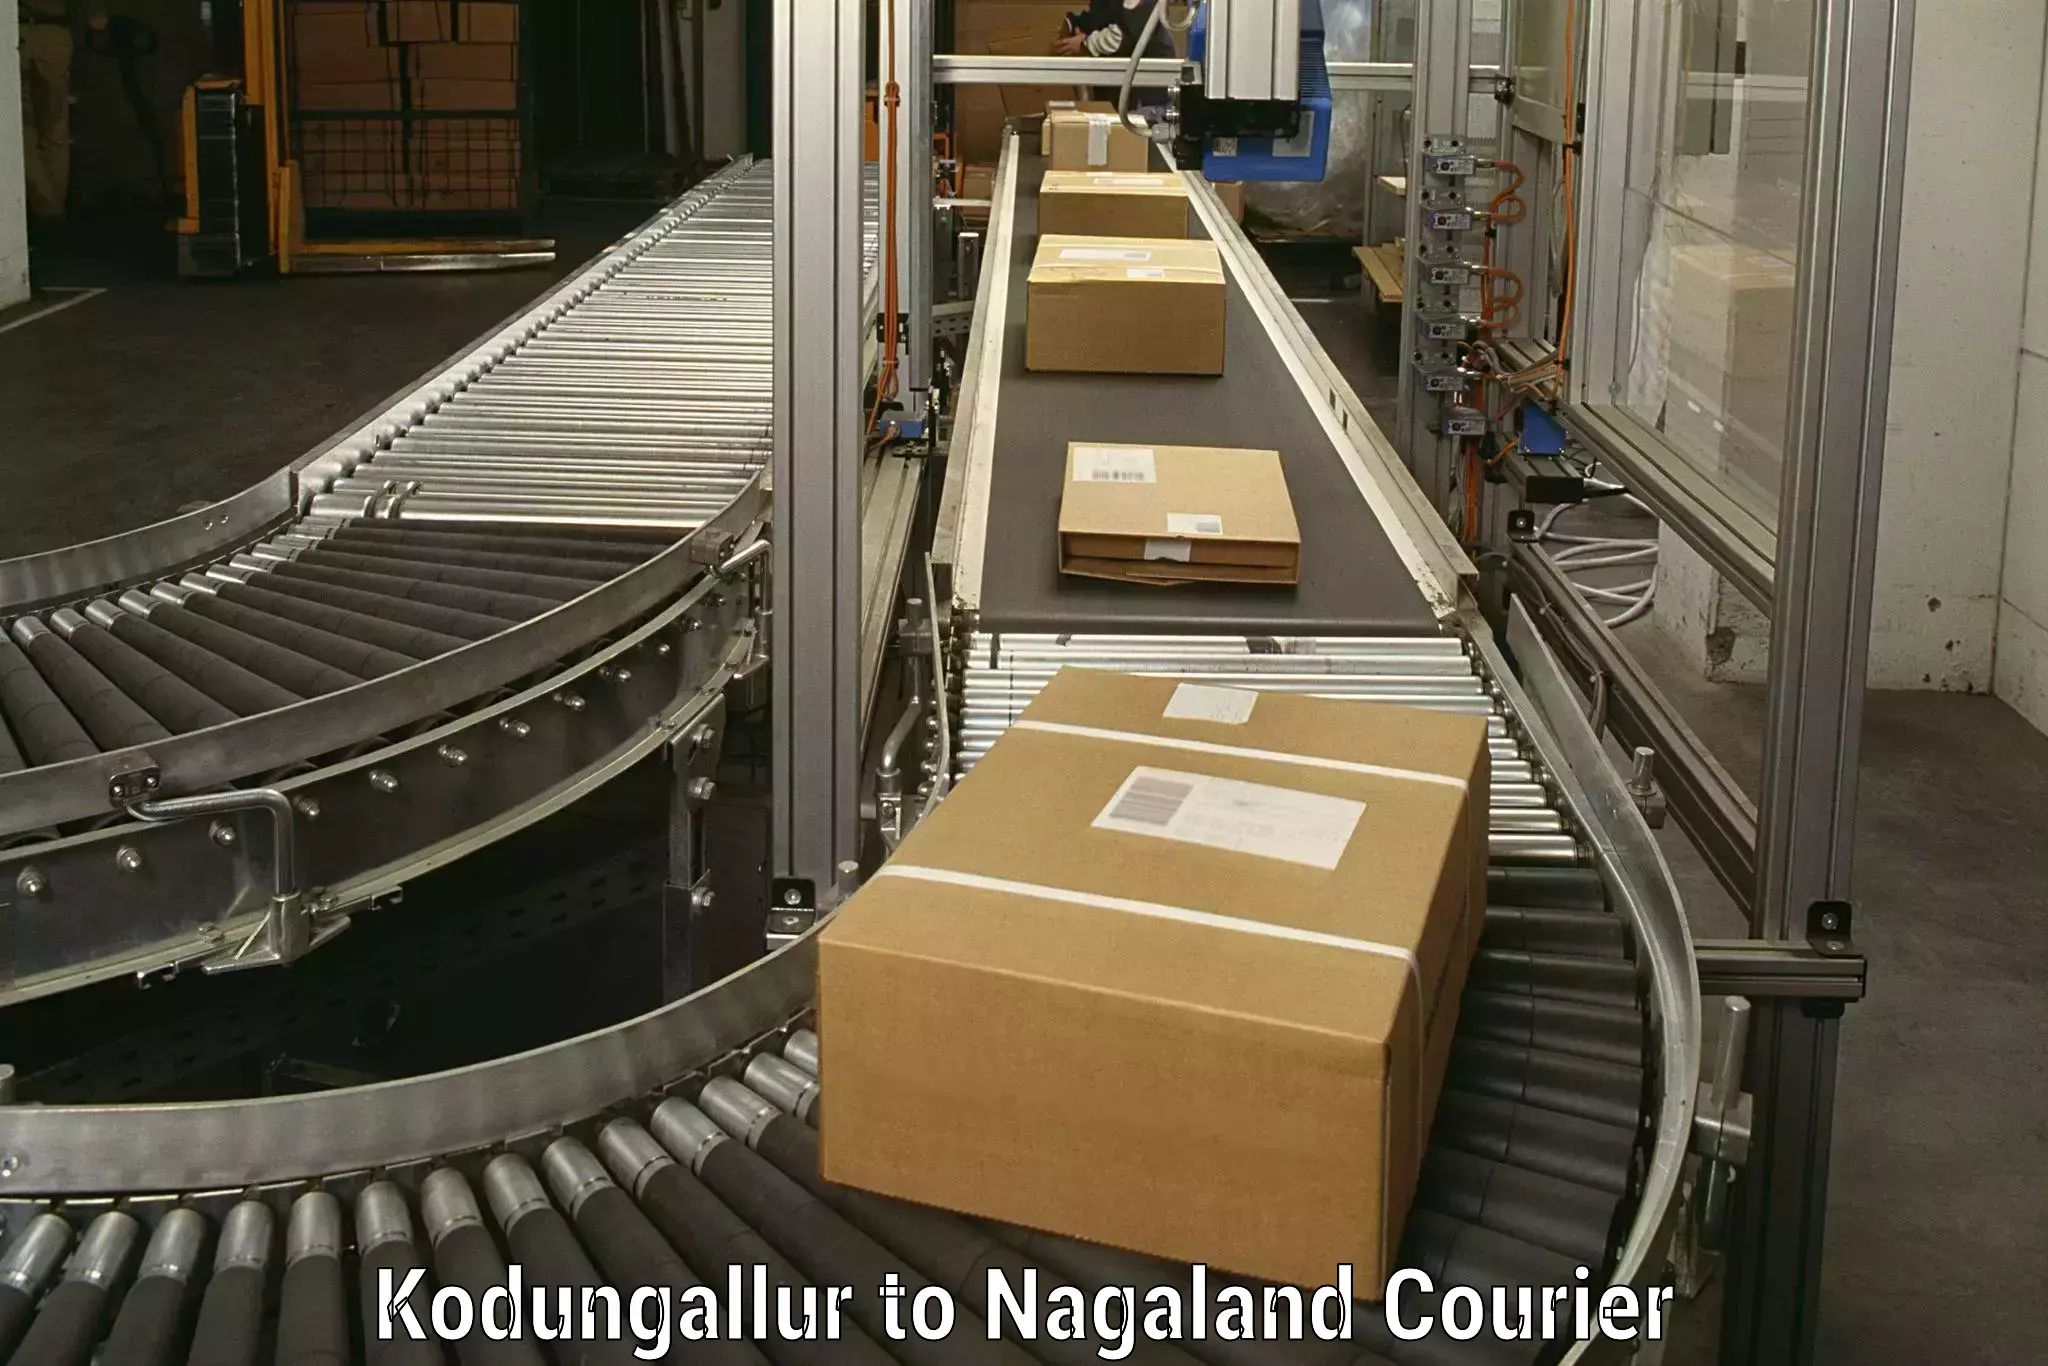 Efficient packing and moving Kodungallur to Nagaland